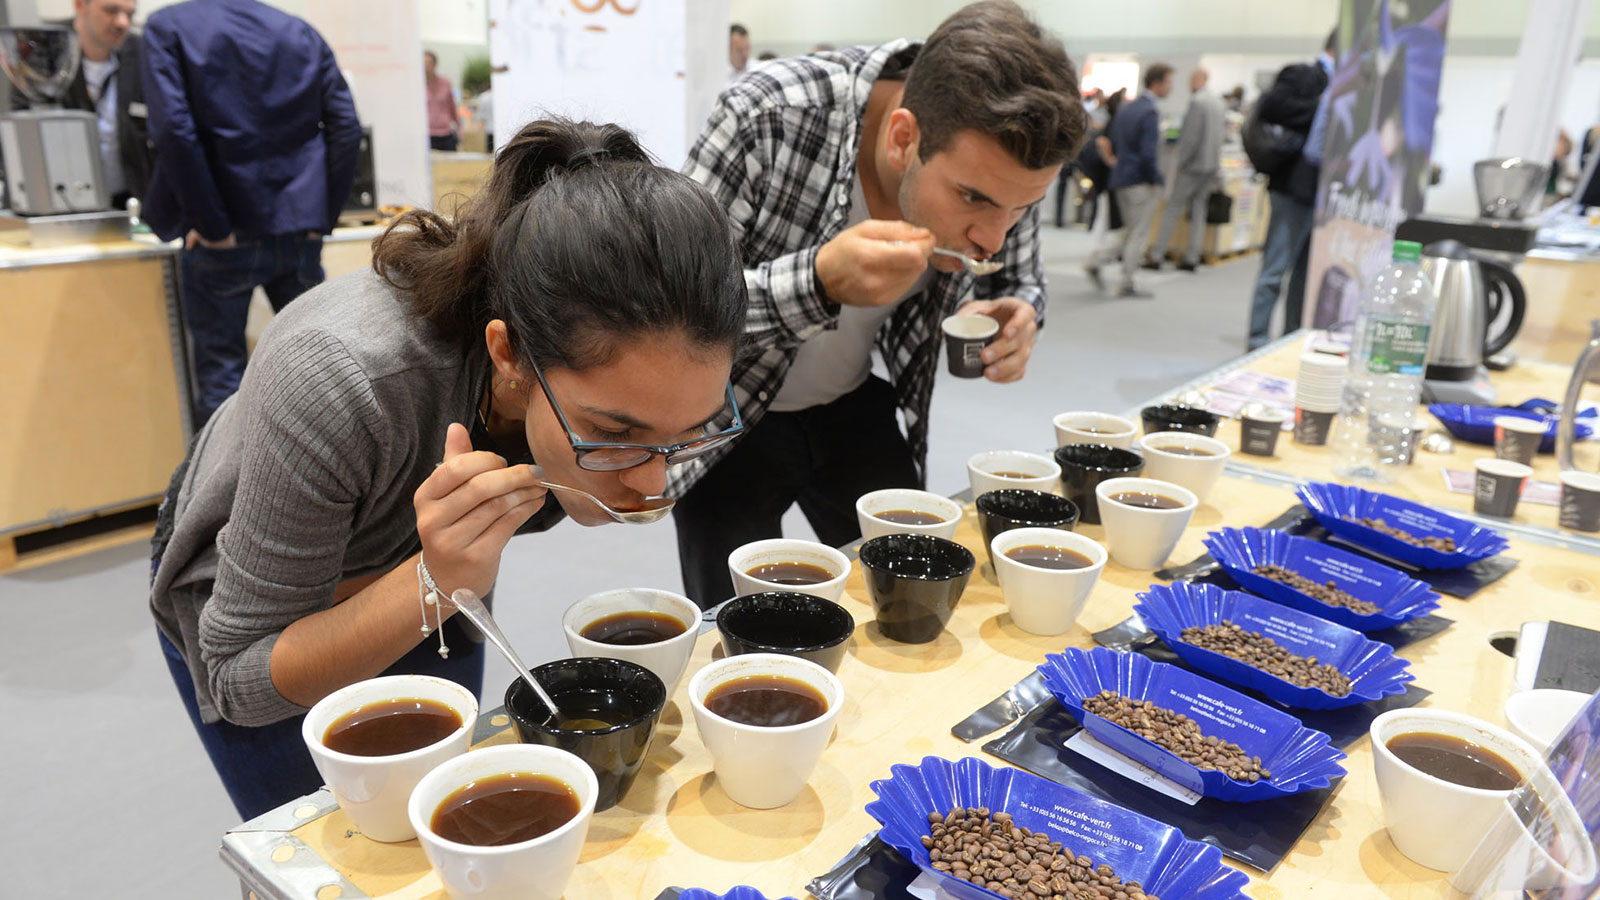 Two visitors to the COTECA Coffee, Tea and Cocoa Global Industry Expo in the Hamburg exhibition halls